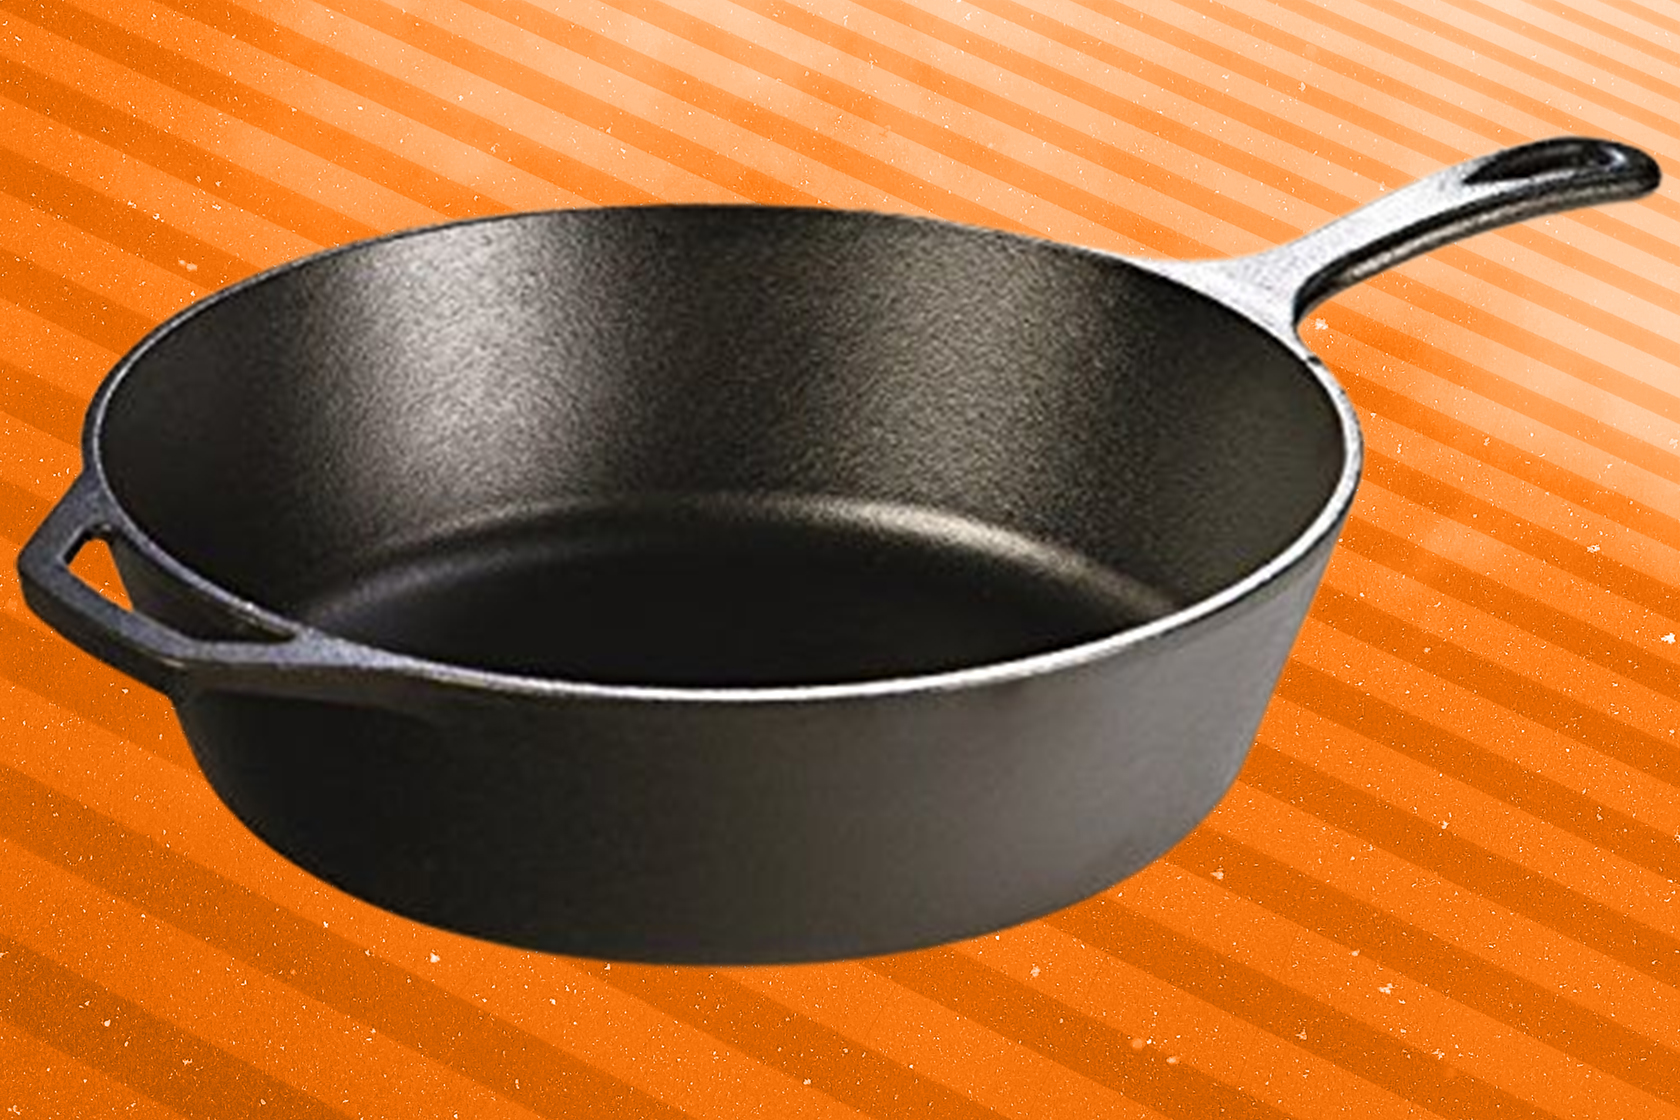 Deep-fry, bake, sauté and sear with this 12-inch Lodge Cast Iron Deep  Skillet